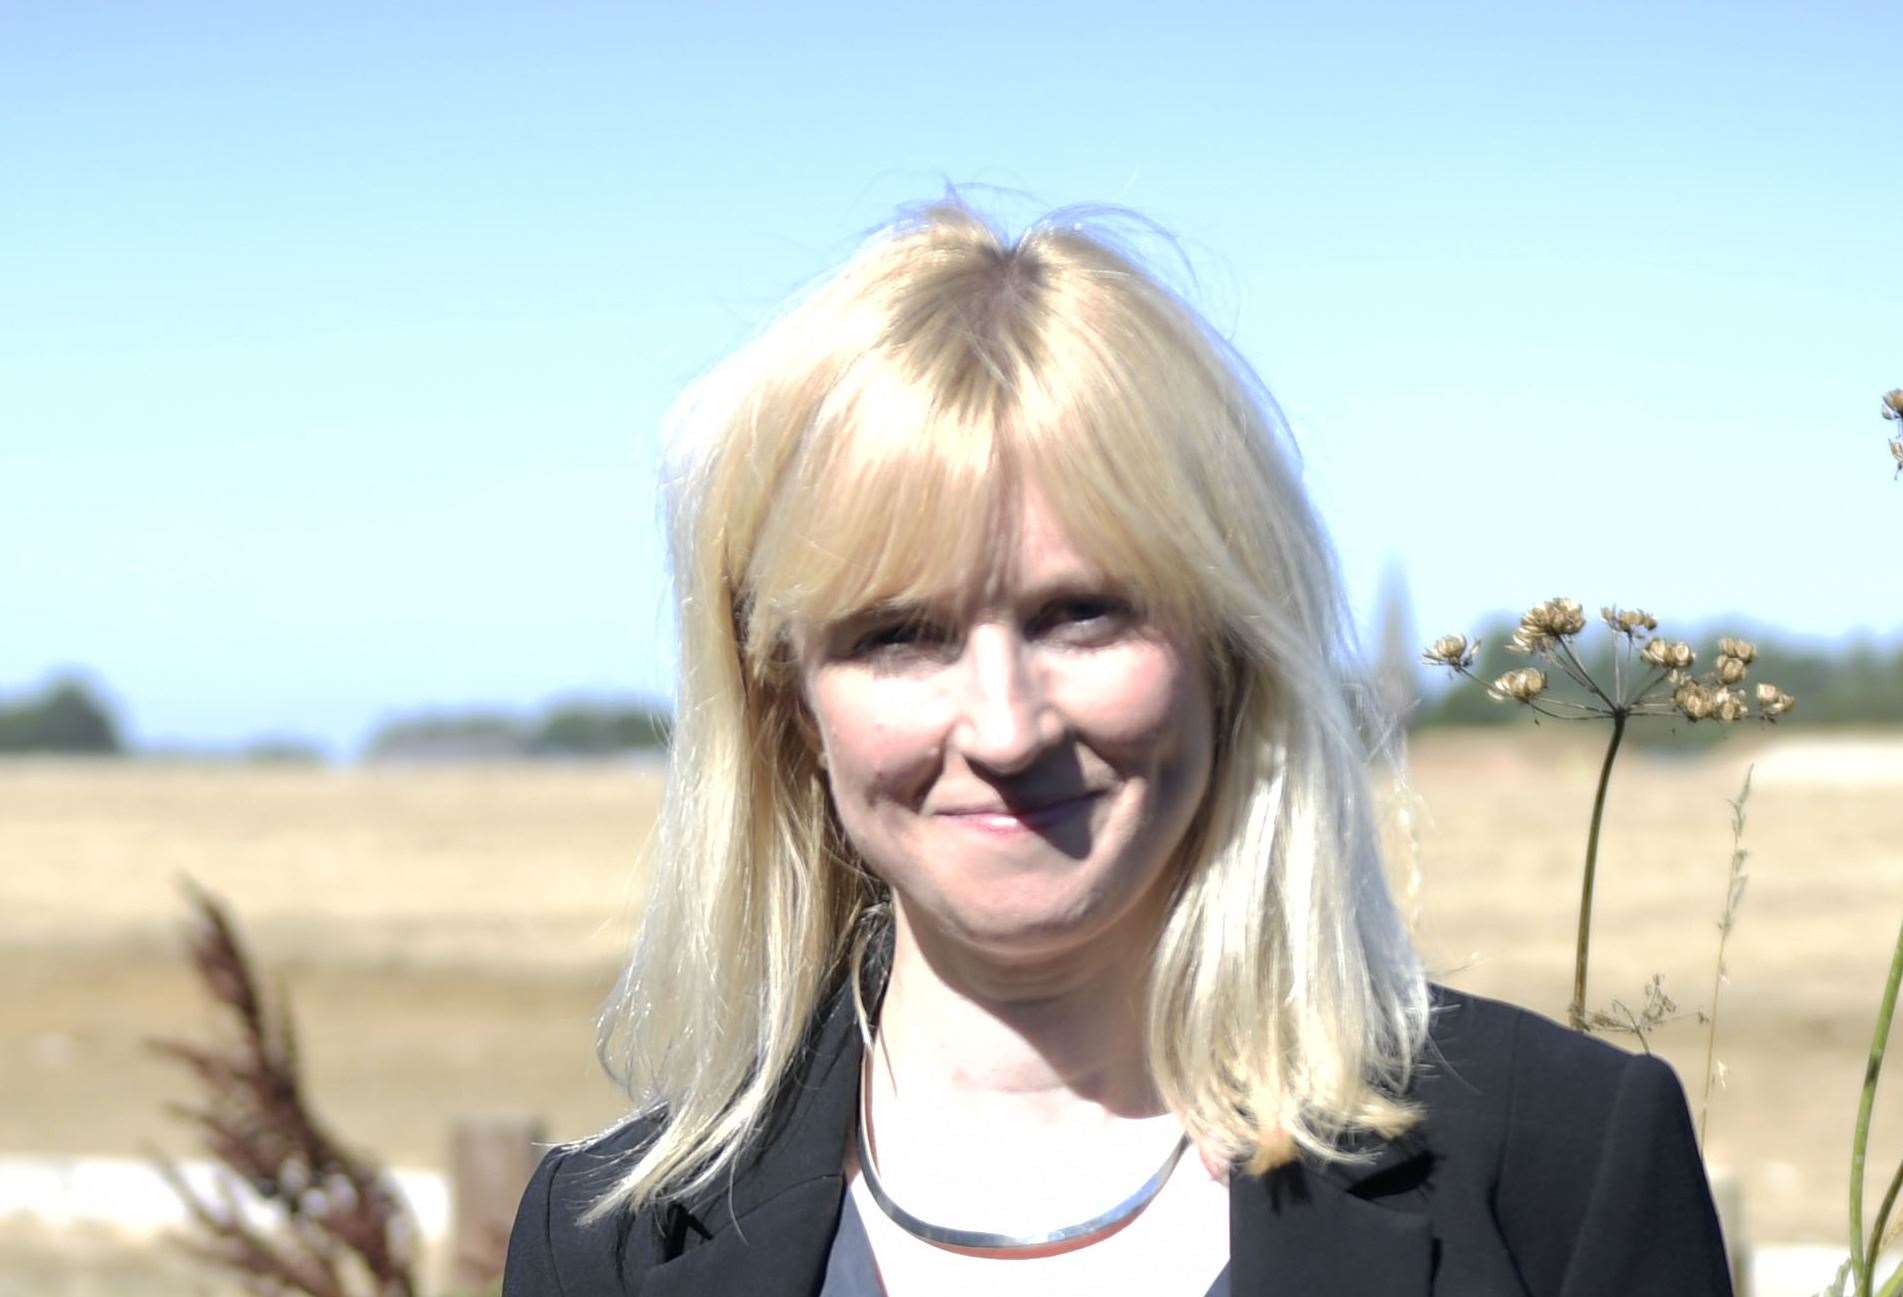 Rosie Duffield has thrown her support behind a women's rights campaign